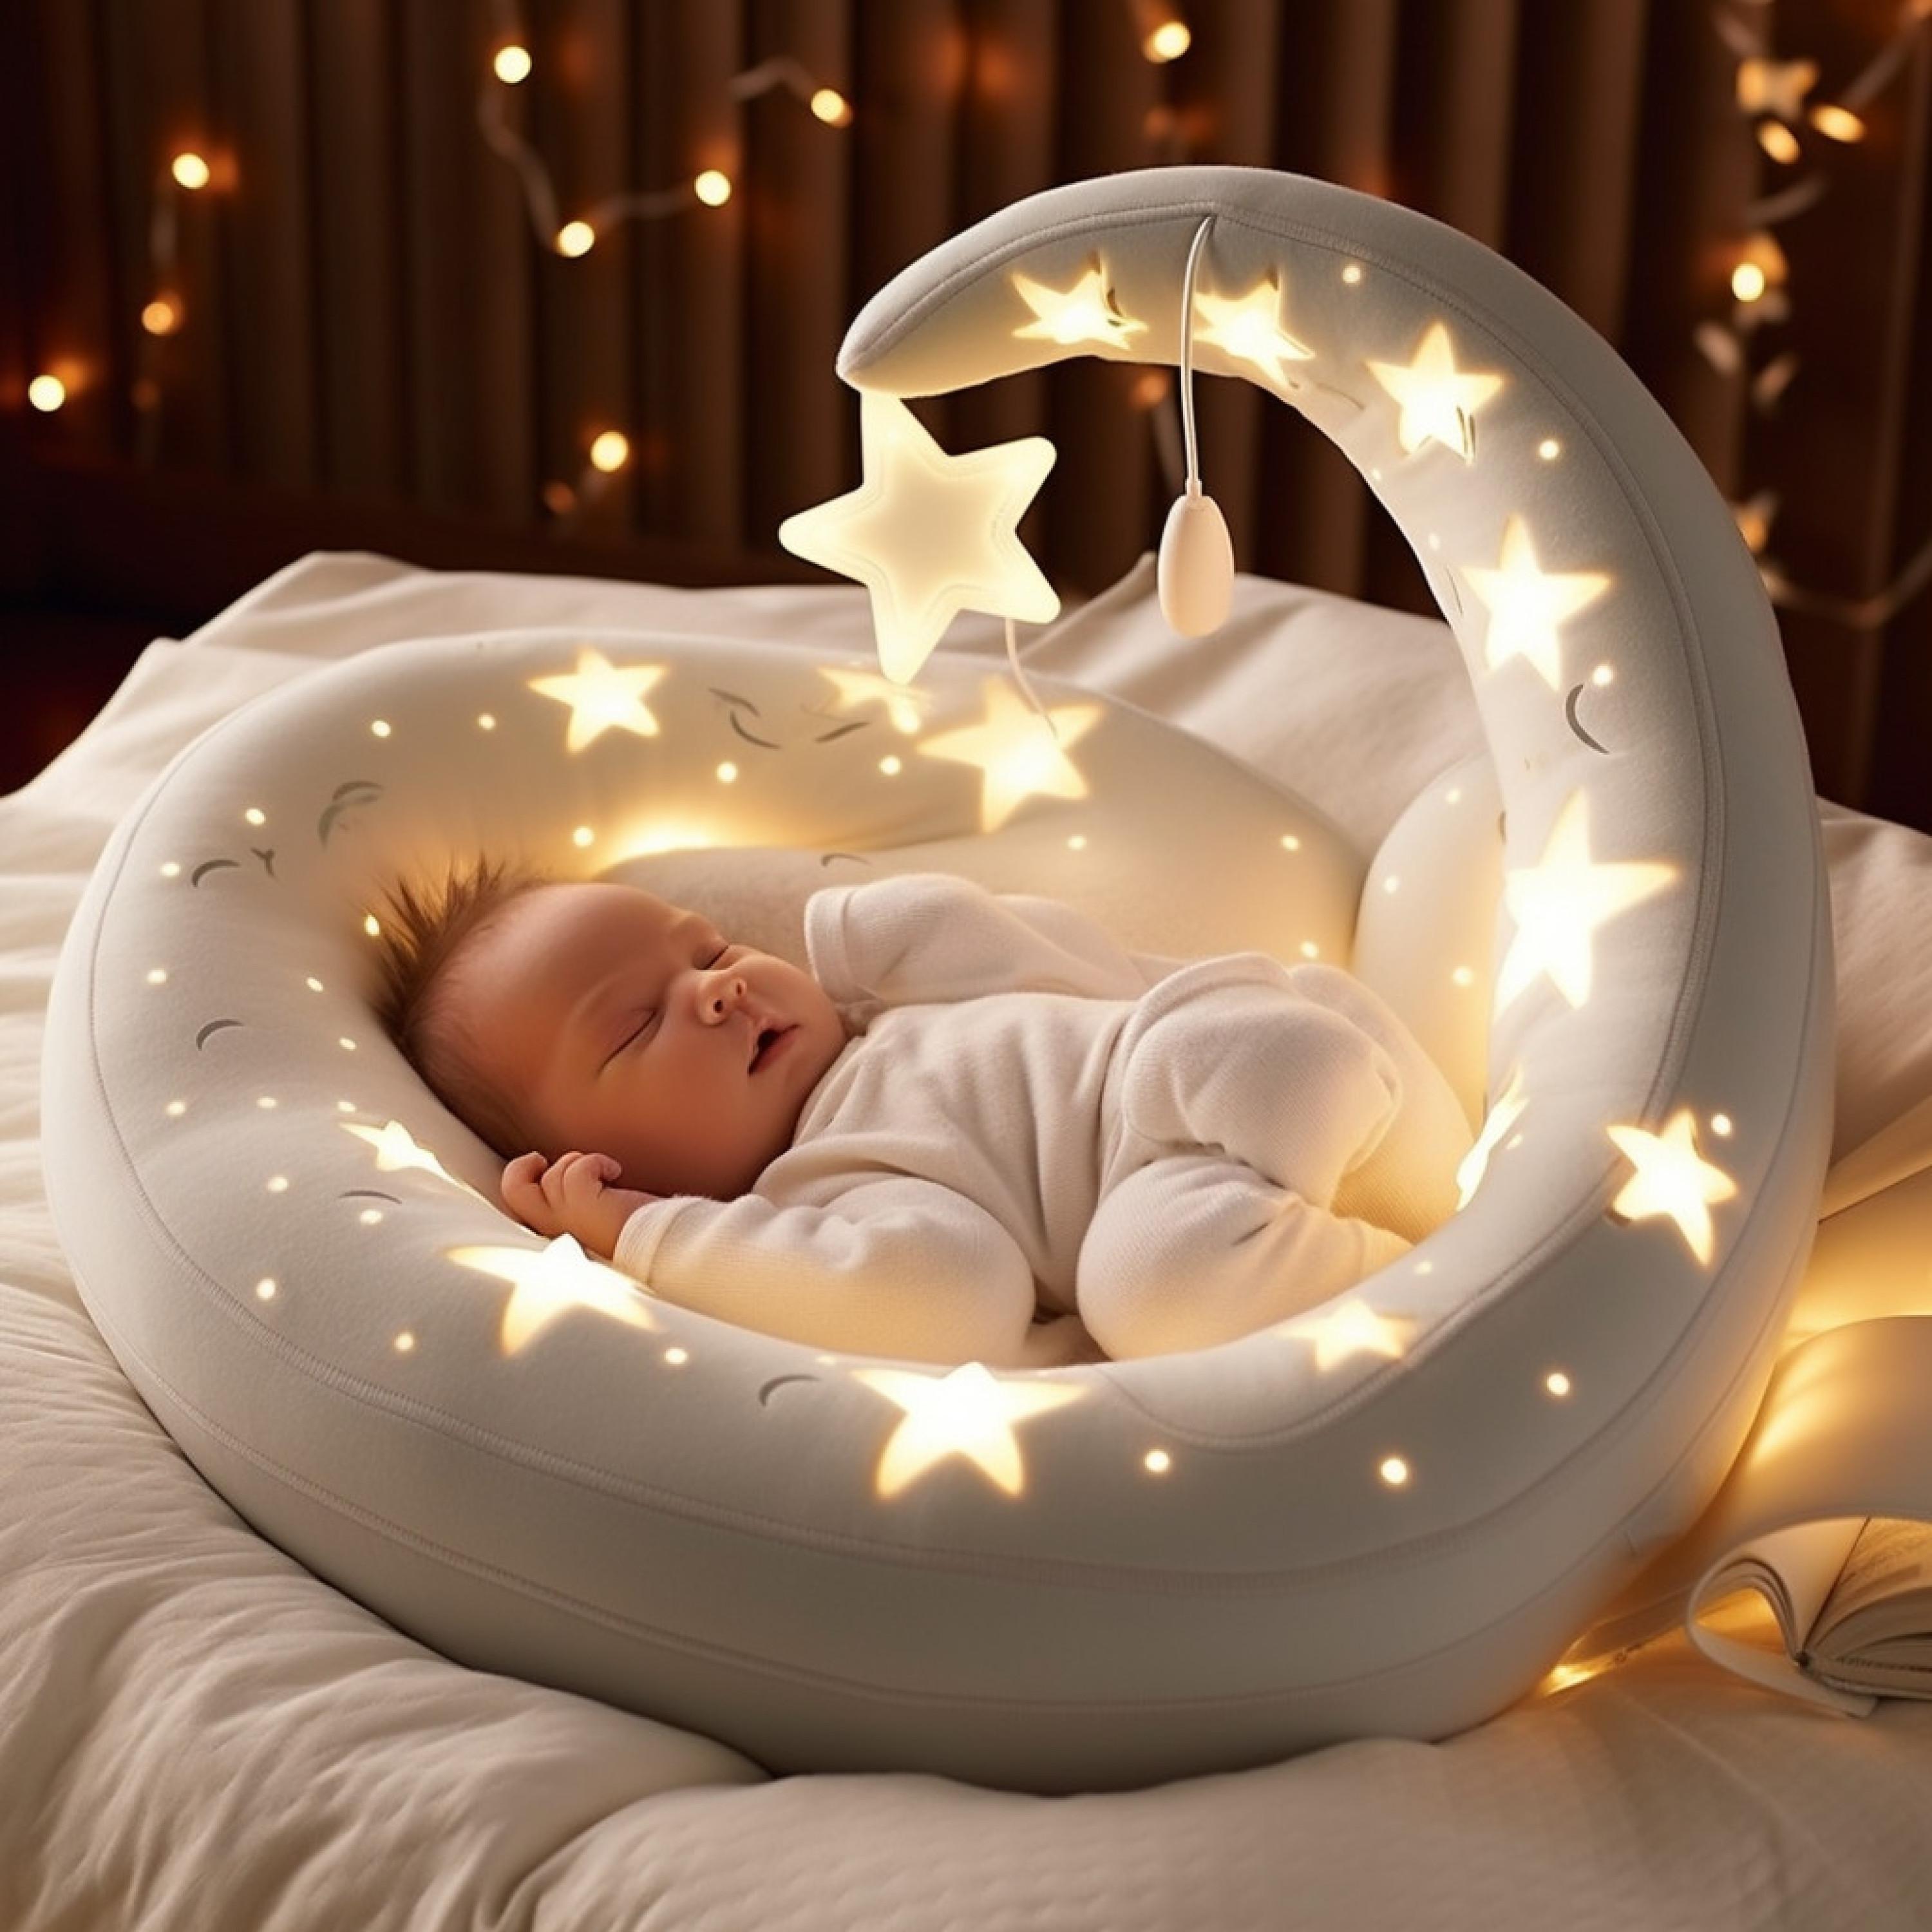 Lullaby World - Supernova Dream Baby Soothe